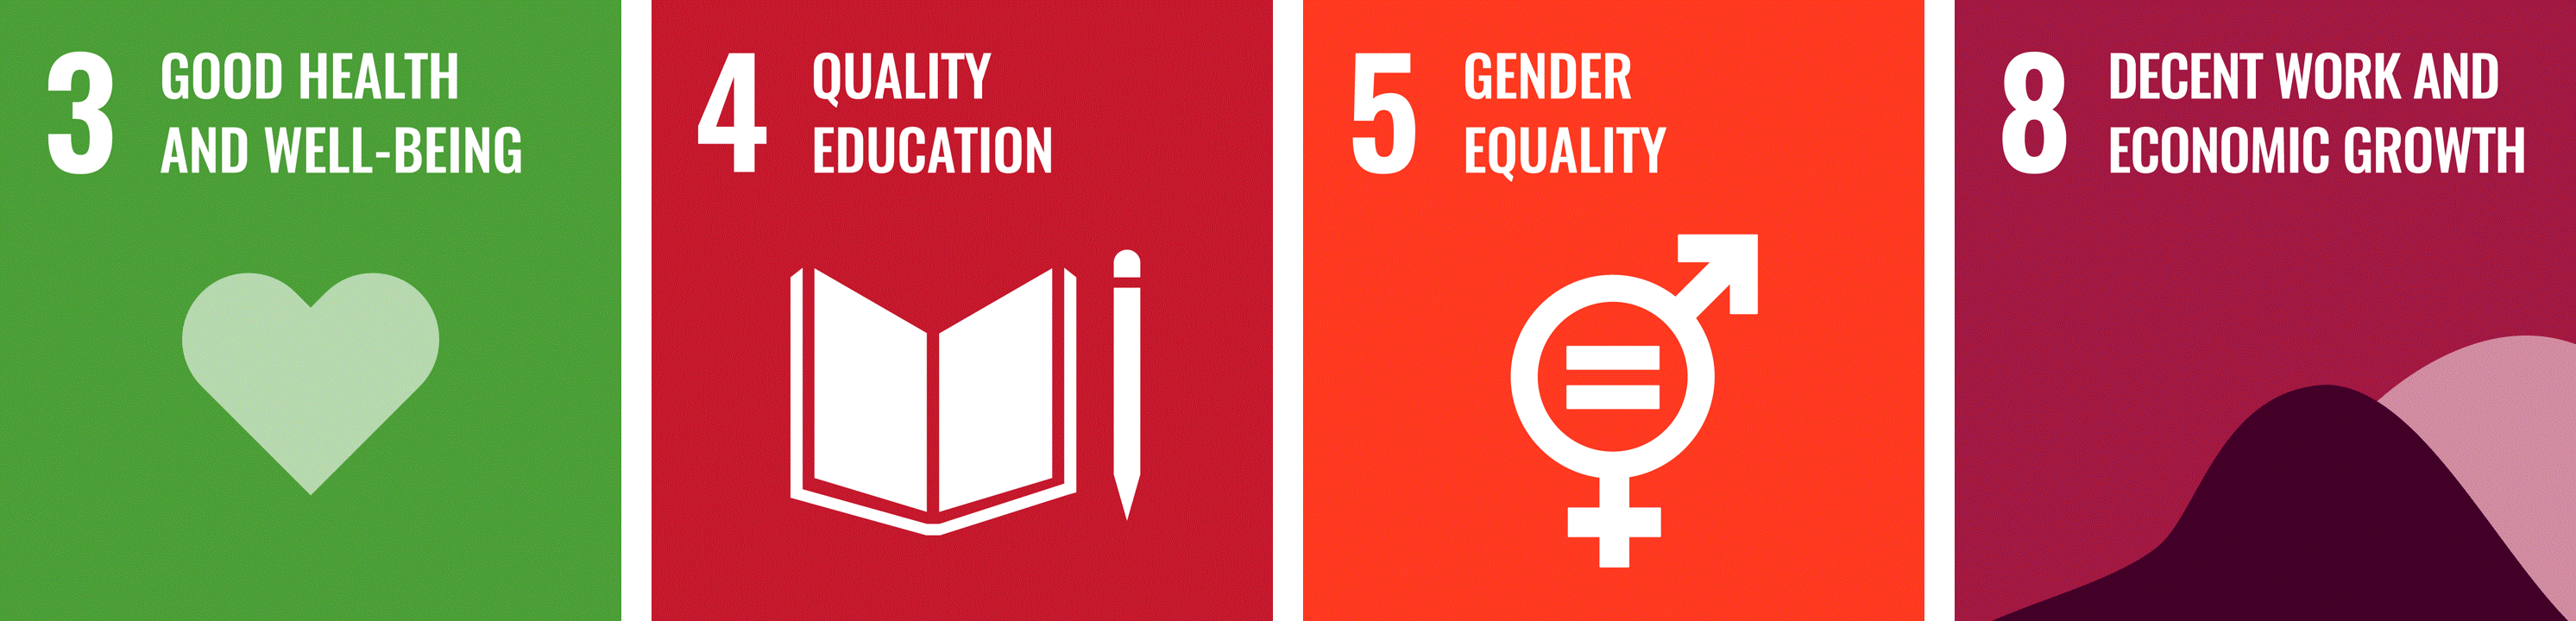 Animated GIF showing icons for SDGs 3, 4, 5, and 8, representing Diona's focus on Good Health and Well-being, Quality Education, Gender Equality, and Decent Work and Economic Growth.